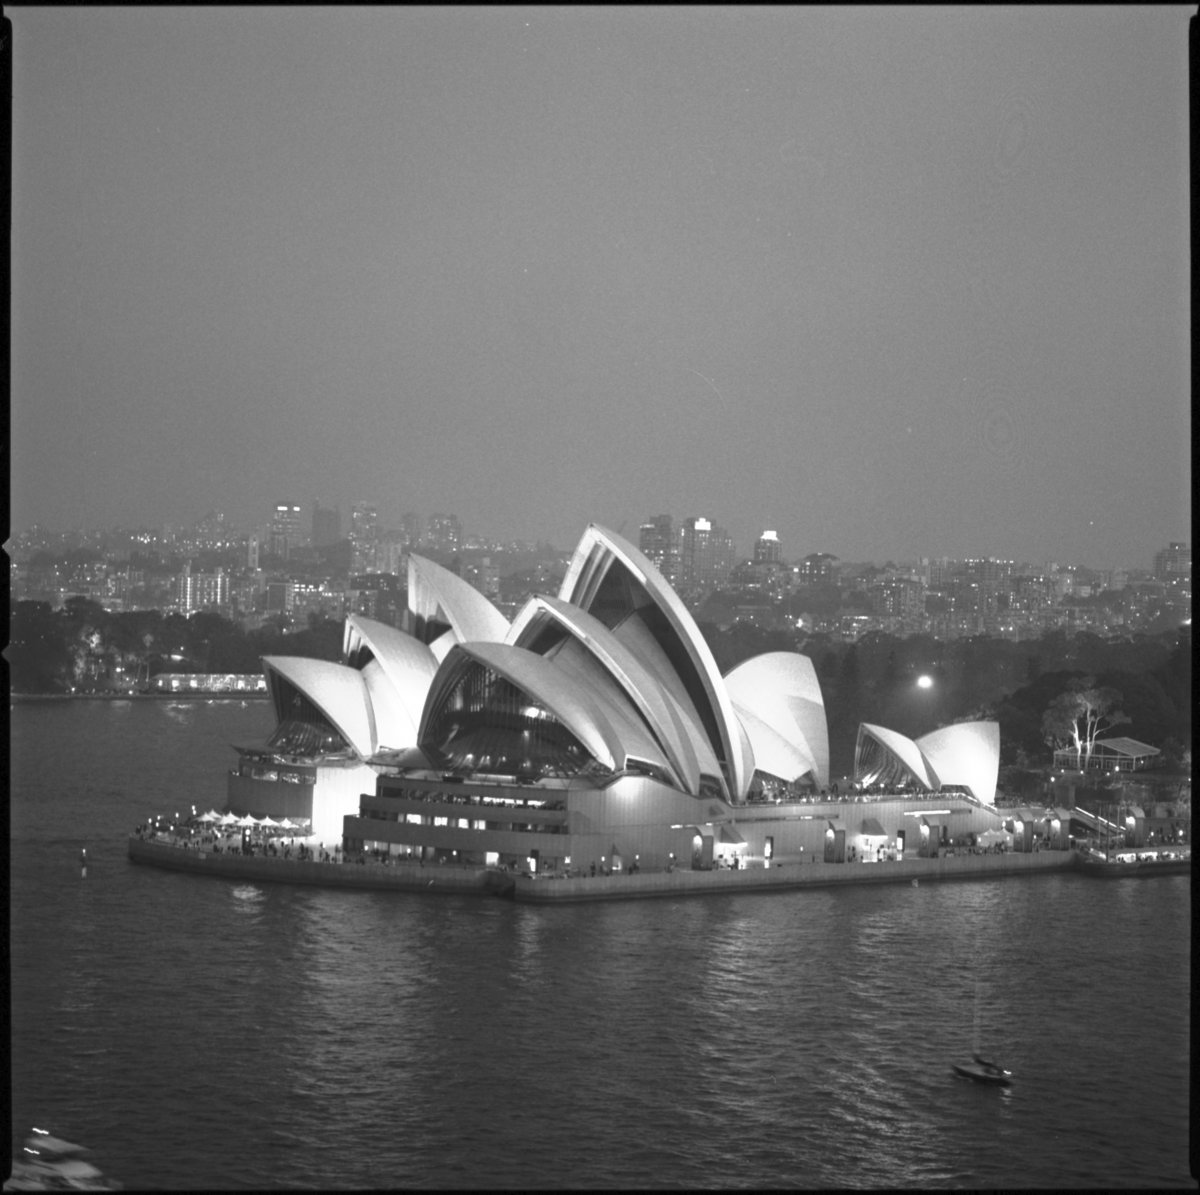 A black and white arial photograph of the Sydney Opera House